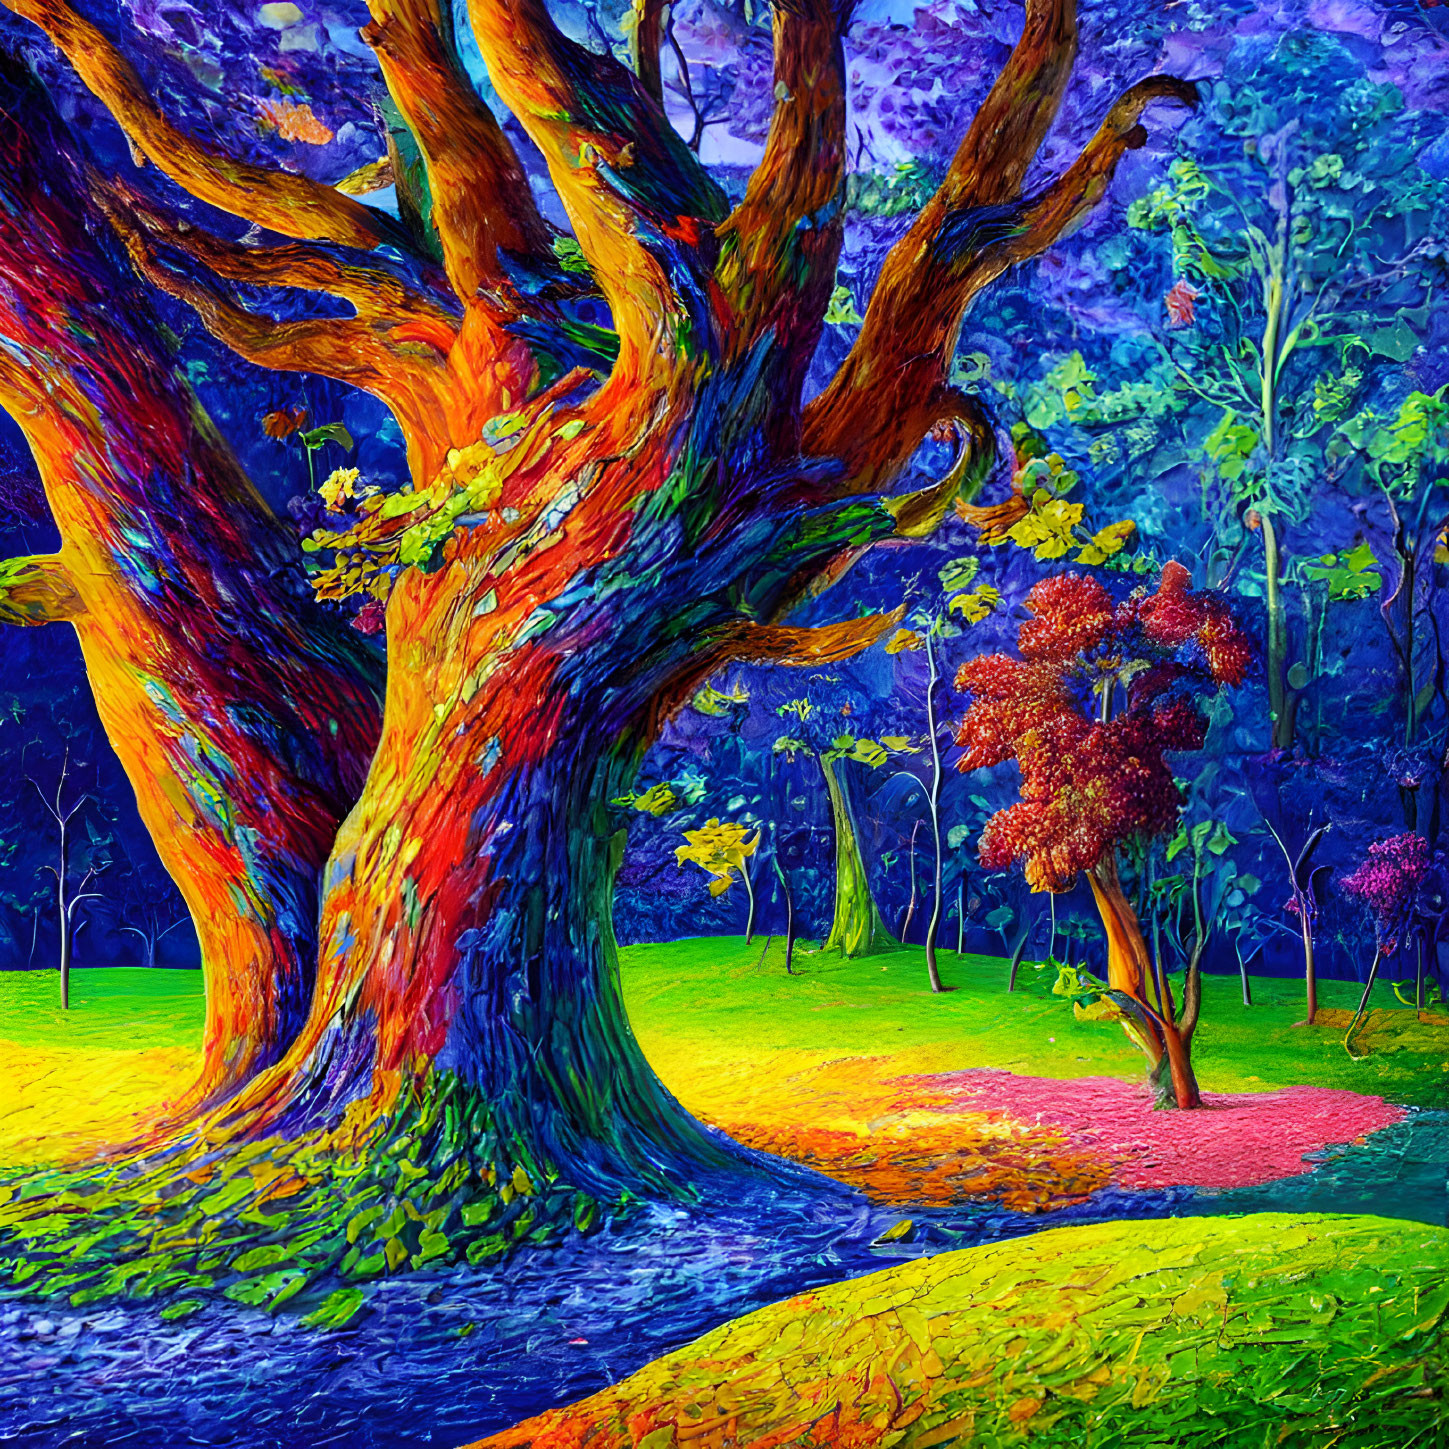 Oil painting of the tree